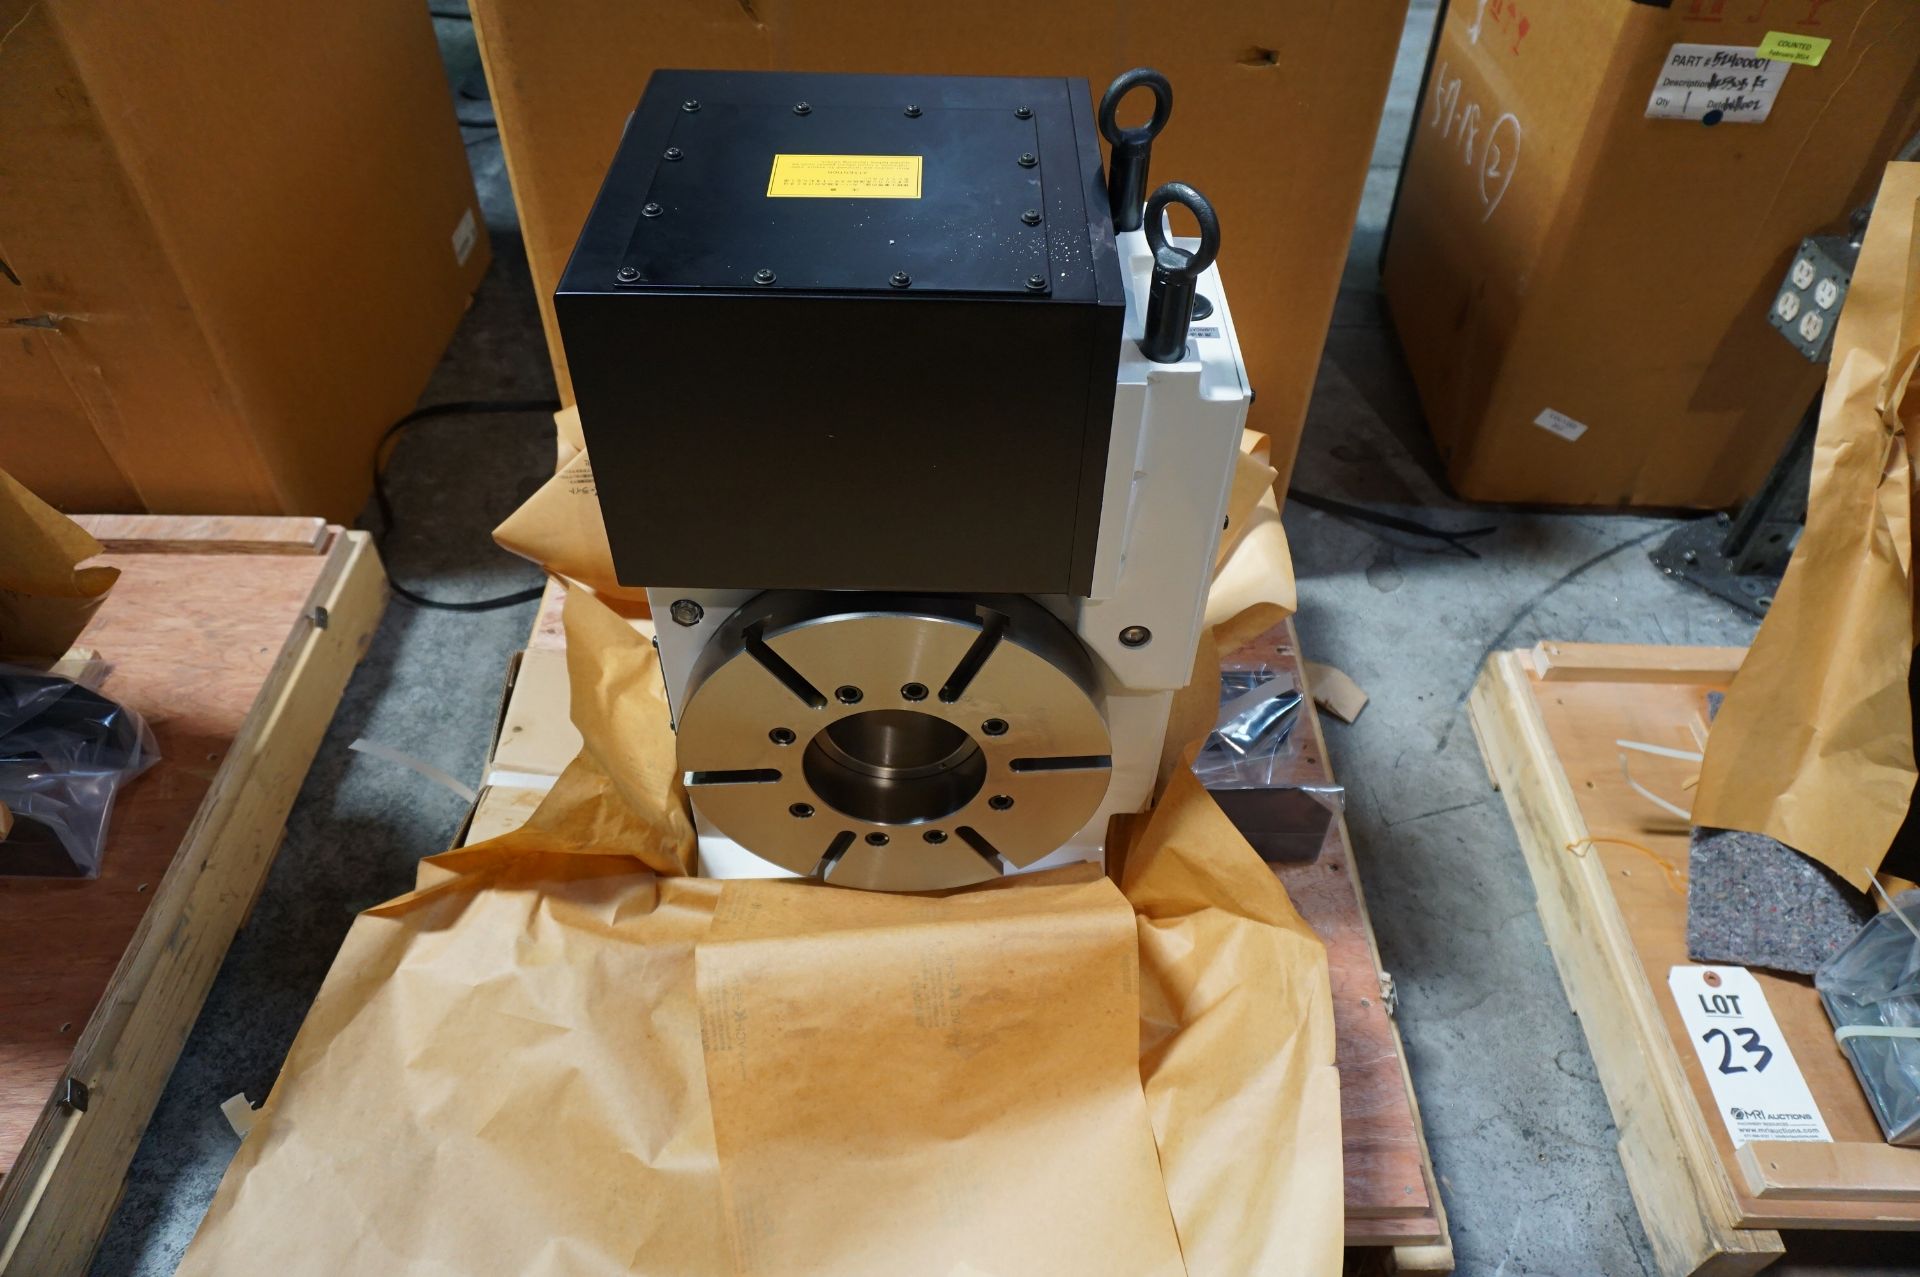 NEVER USED IN ORIGINAL BOX - 2009 KITIGAWA TUX320BE01 4TH AXIS ROTARY TABLE S/N 090373 - Image 2 of 7